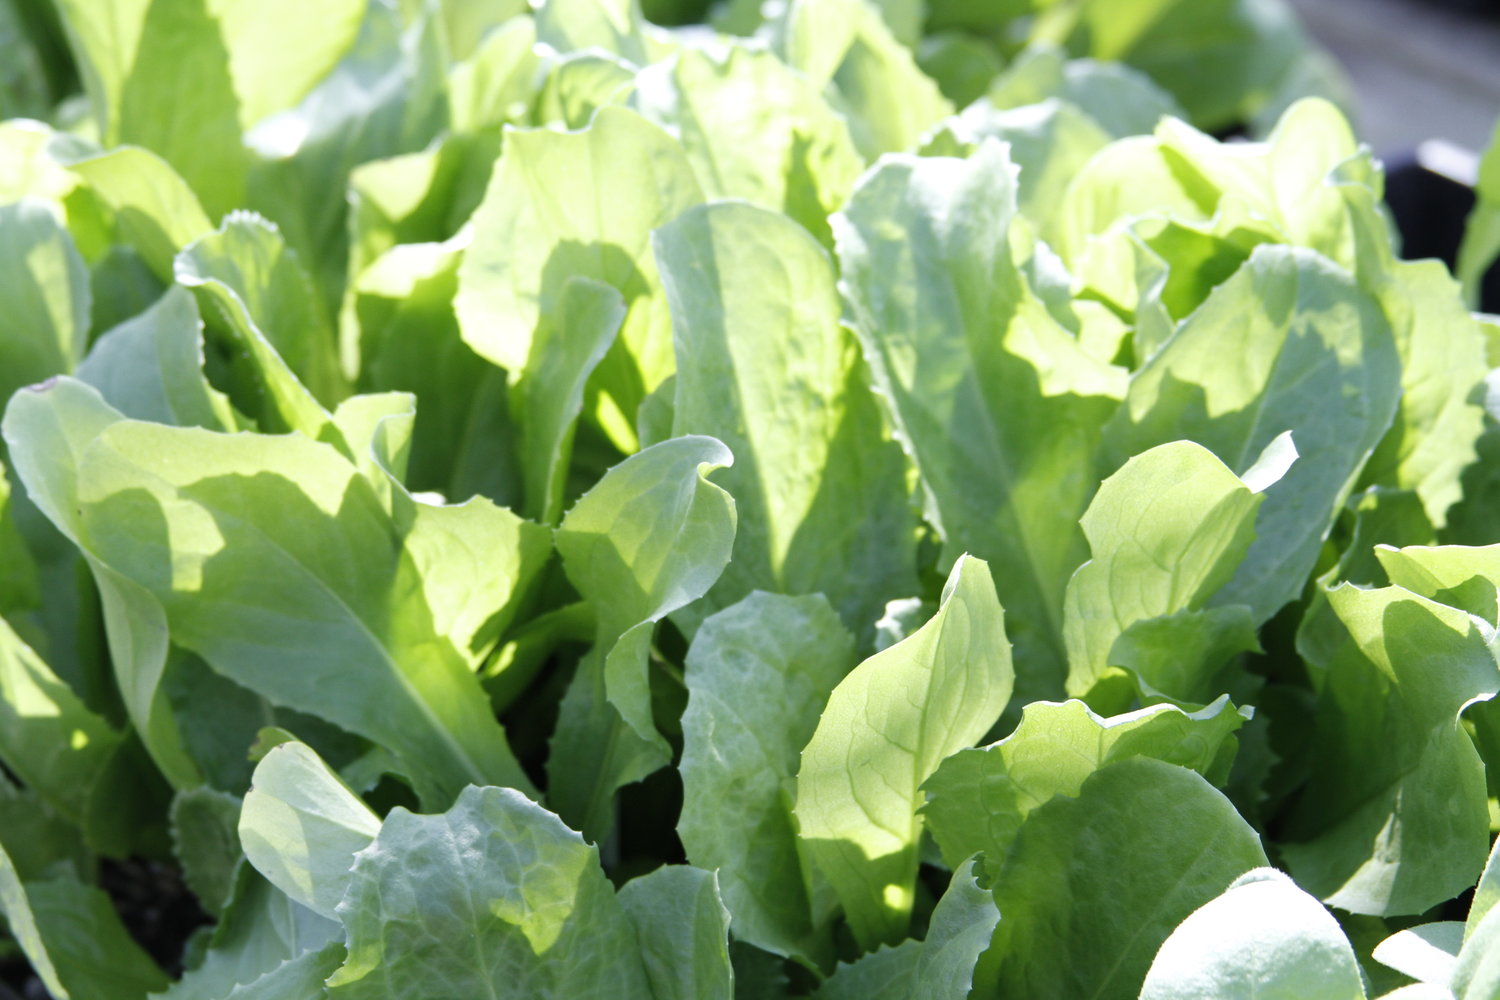 How to Grow Salad Greens in Containers
